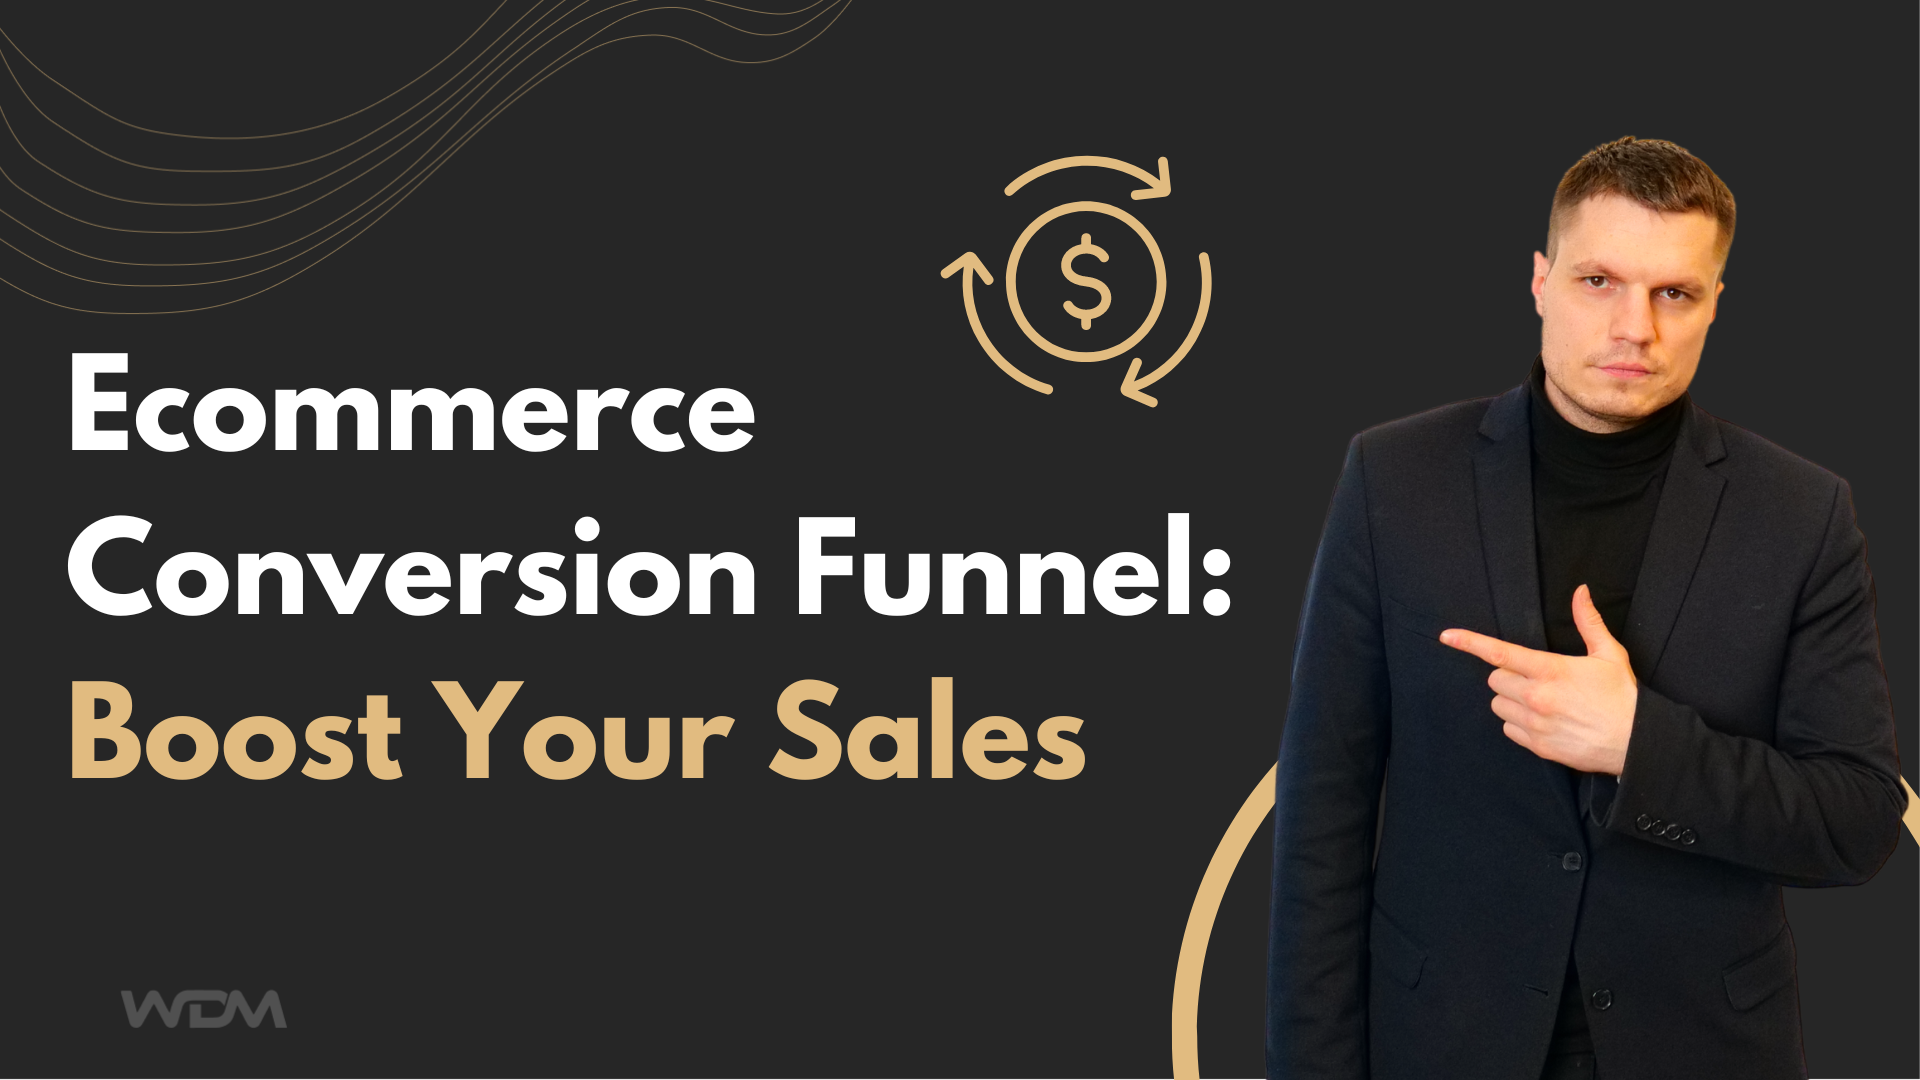 Ecommerce Conversion Funnel: Boost Your Sales